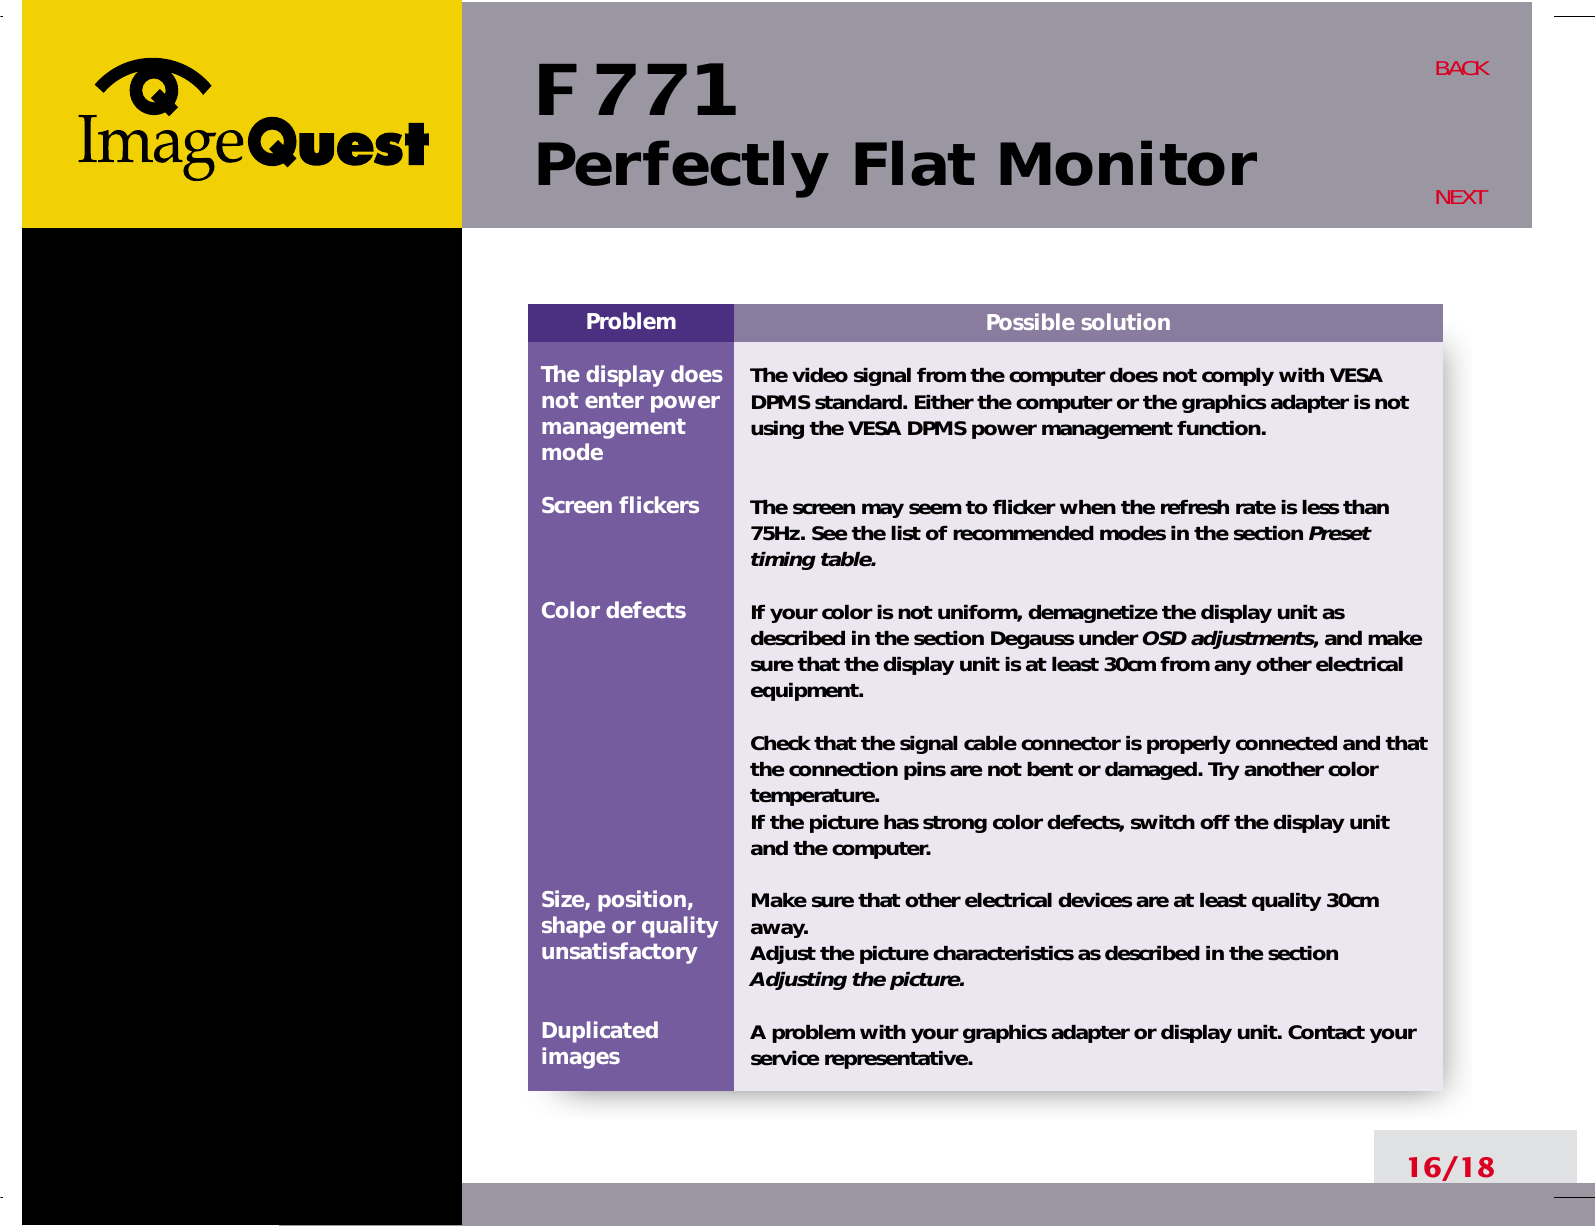 F 771Perfectly Flat Monitor16/18BACKNEXTPossible solutionThe video signal from the computer does not comply with VESADPMS standard. Either the computer or the graphics adapter is notusing the VESA DPMS power management function.The screen may seem to flicker when the refresh rate is less than75Hz. See the list of recommended modes in the section Presettiming table.If your color is not uniform, demagnetize the display unit asdescribed in the section Degauss under OSD adjustments, and makesure that the display unit is at least 30cm from any other electricalequipment.Check that the signal cable connector is properly connected and thatthe connection pins are not bent or damaged. Try another colortemperature. If the picture has strong color defects, switch off the display unitand the computer.Make sure that other electrical devices are at least quality 30cmaway.Adjust the picture characteristics as described in the sectionAdjusting the picture.A problem with your graphics adapter or display unit. Contact yourservice representative.ProblemThe display does not enter power managementmodeScreen flickersColor defectsSize, position,shape or qualityunsatisfactoryDuplicatedimages